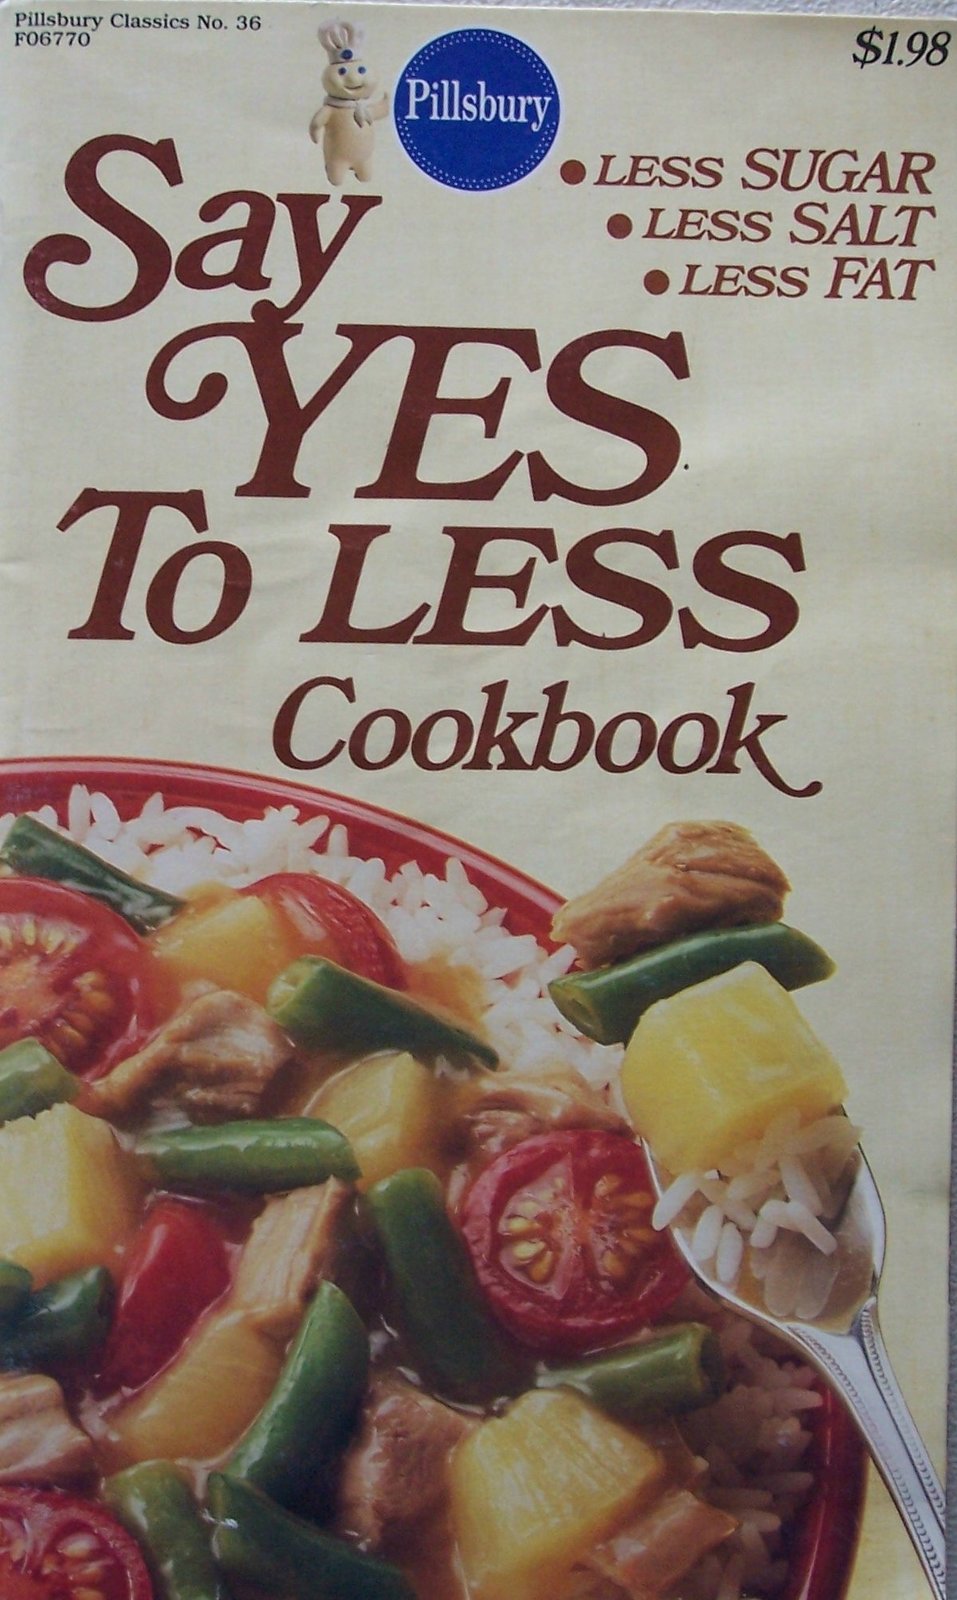 Primary image for Pillsbury Say Yes to Less Cookbook [ 1983, FO6770 ] Pillsbury Classics No. 36 (l